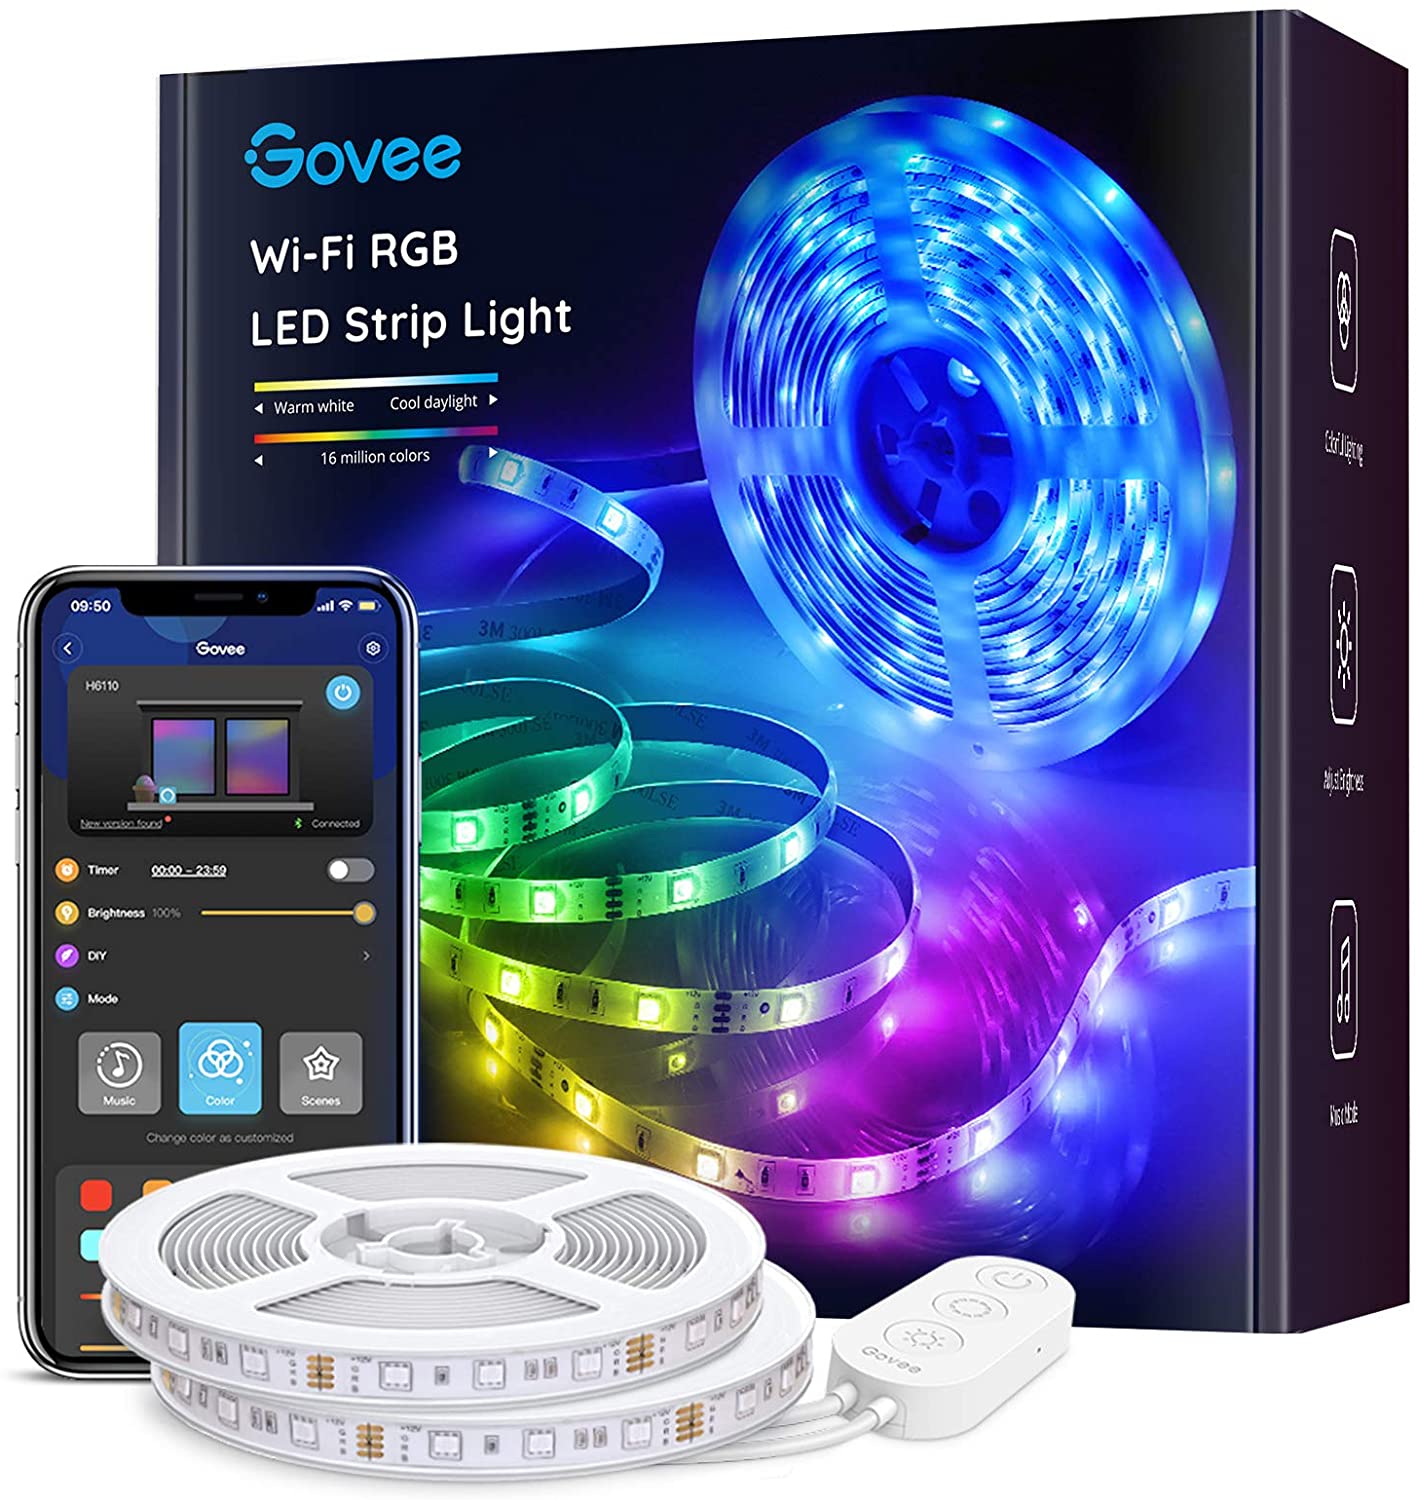 Govee Smart WiFi LED Strip Lights Works with Alexa, Google Home 5050 LED, 16 Million Colors Phone App Controlled Music Light Strip for Home, Kitchen, TV, Party, for iOS and Android,